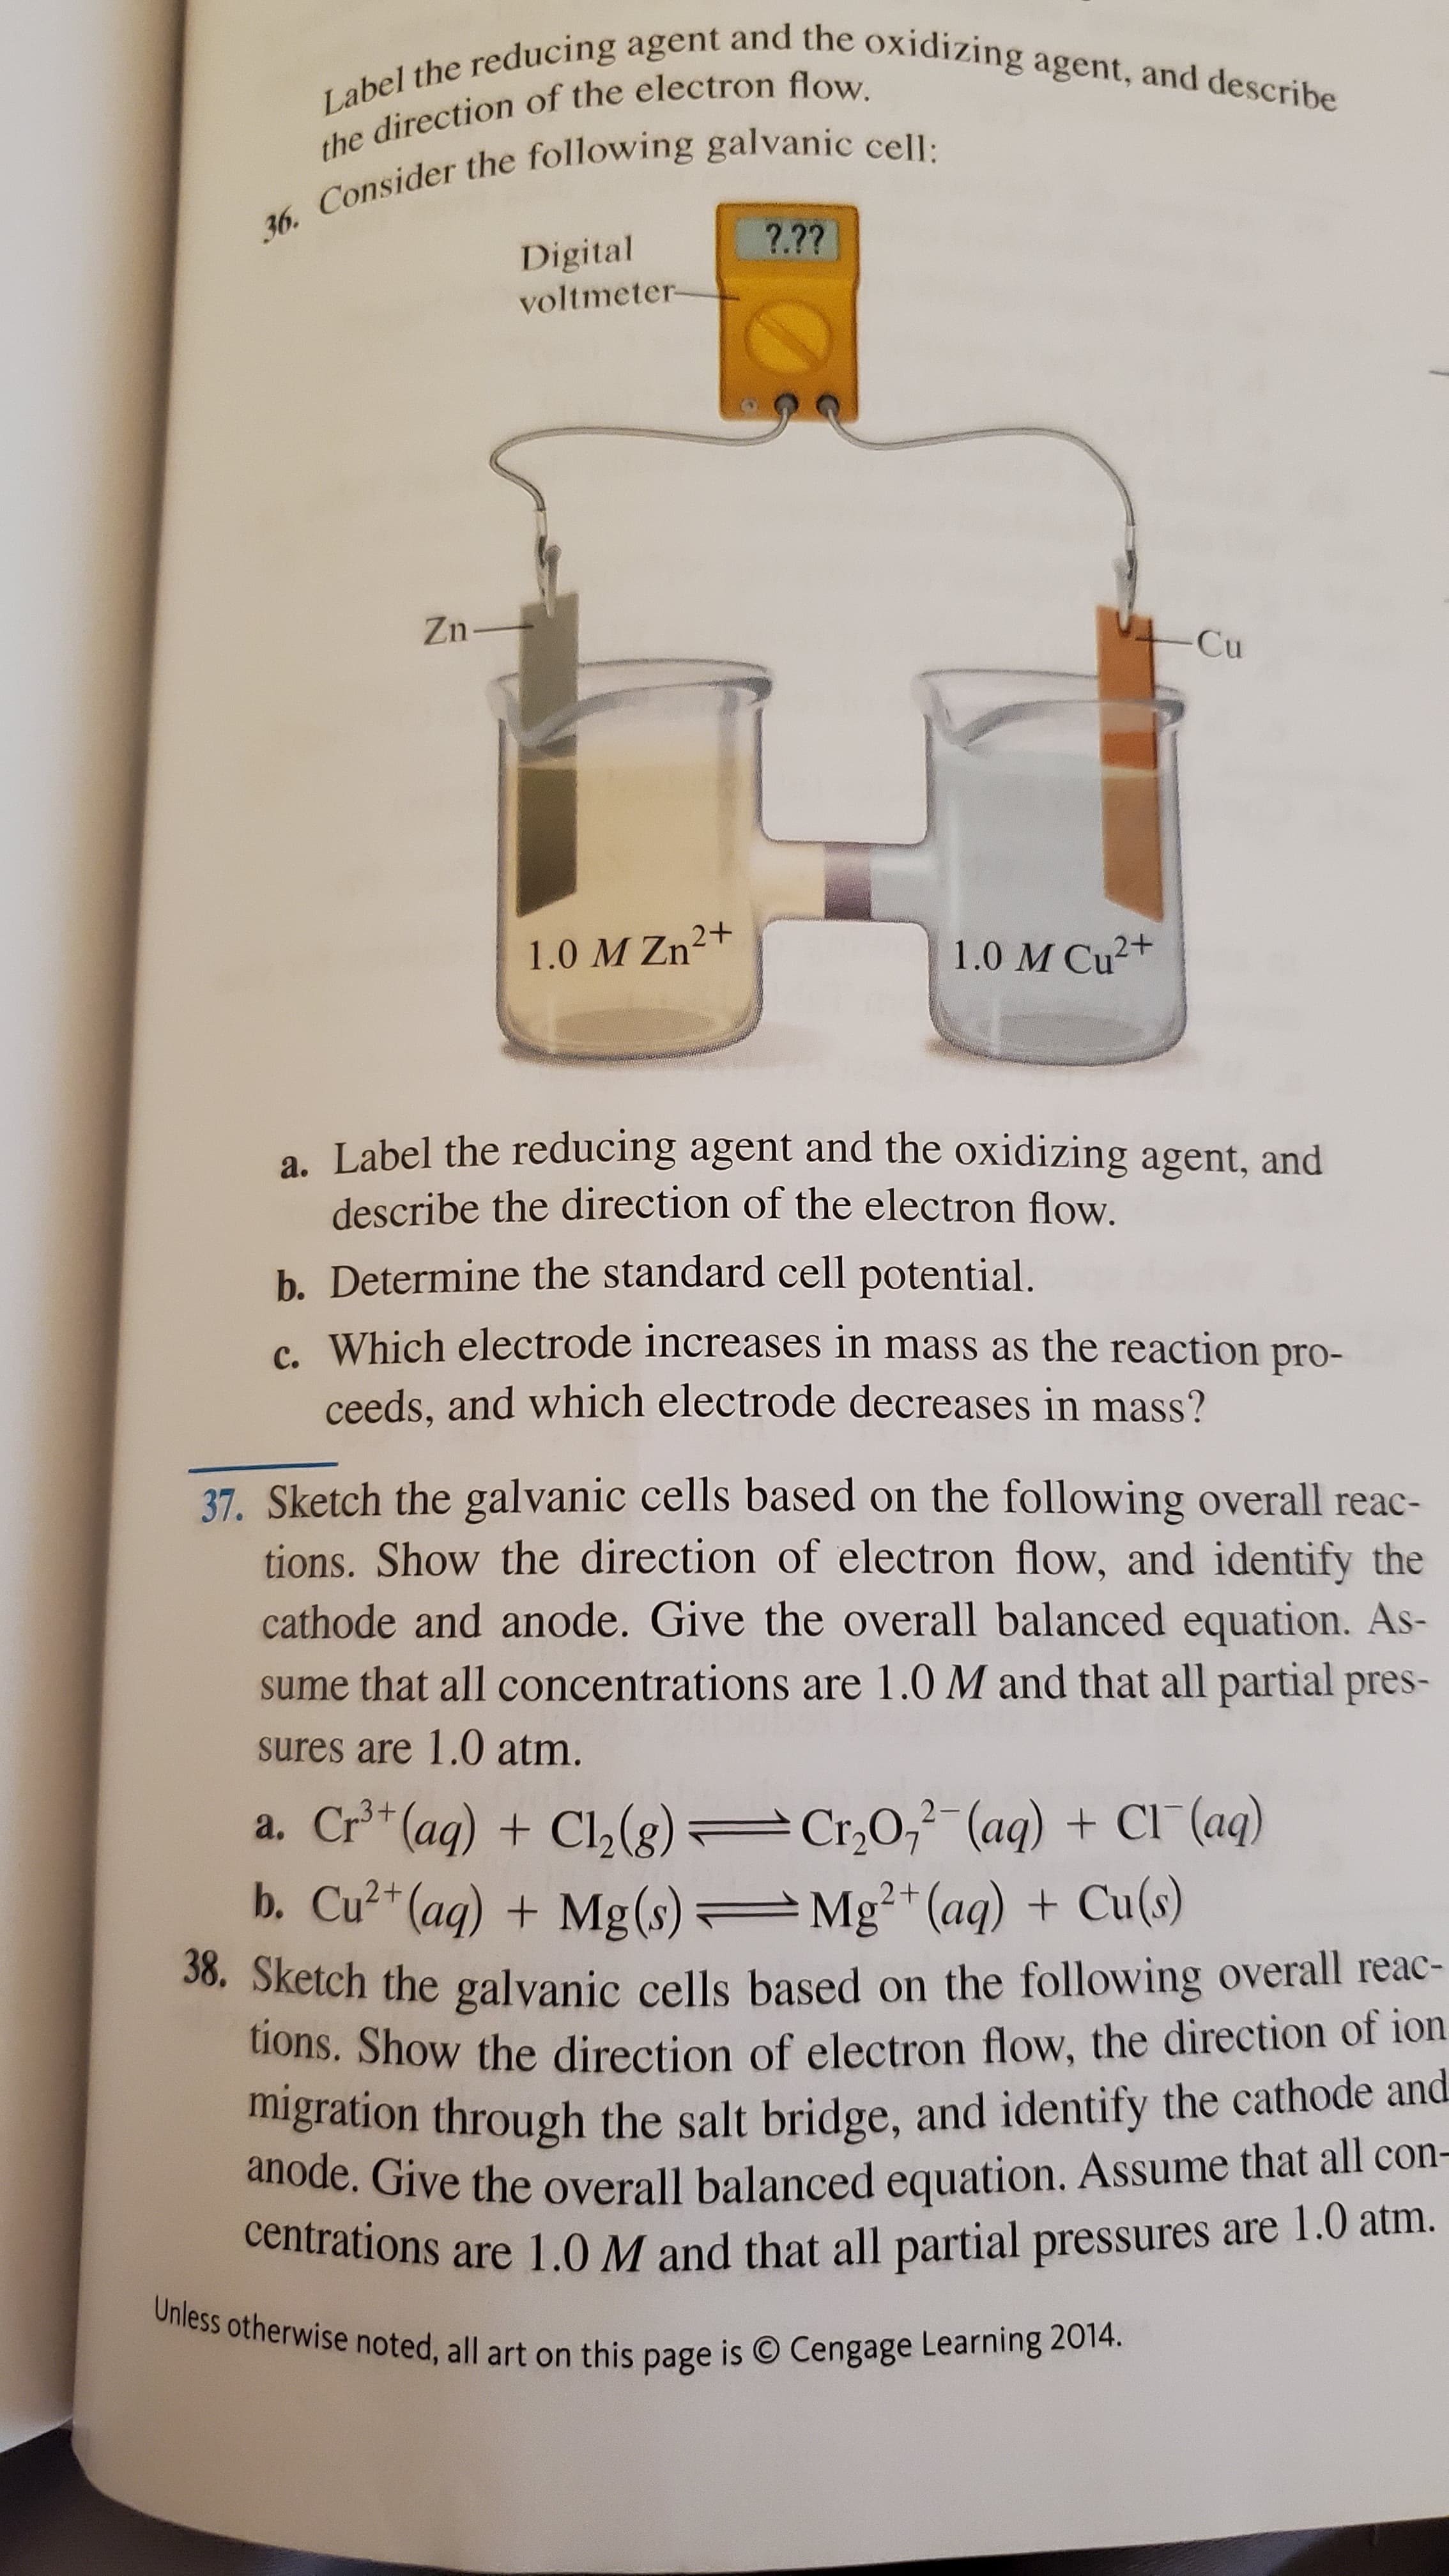 37. Sketch the galvanic cells based on the following overall reac-
tions. Show the direction of electron flow, and identify the
cathode and anode. Give the overall balanced equation. As-
sume that all concentrations are 1.0 M and that all partial pres-
sures are 1.0 atm.
a. Cr* (aq) + Cl,(g) Cr,0,2-(aq) + Cl (aq)
b. Cu?* (ag) + Mg(s)
.3+
Mg²* (aq) + Cu(s)
